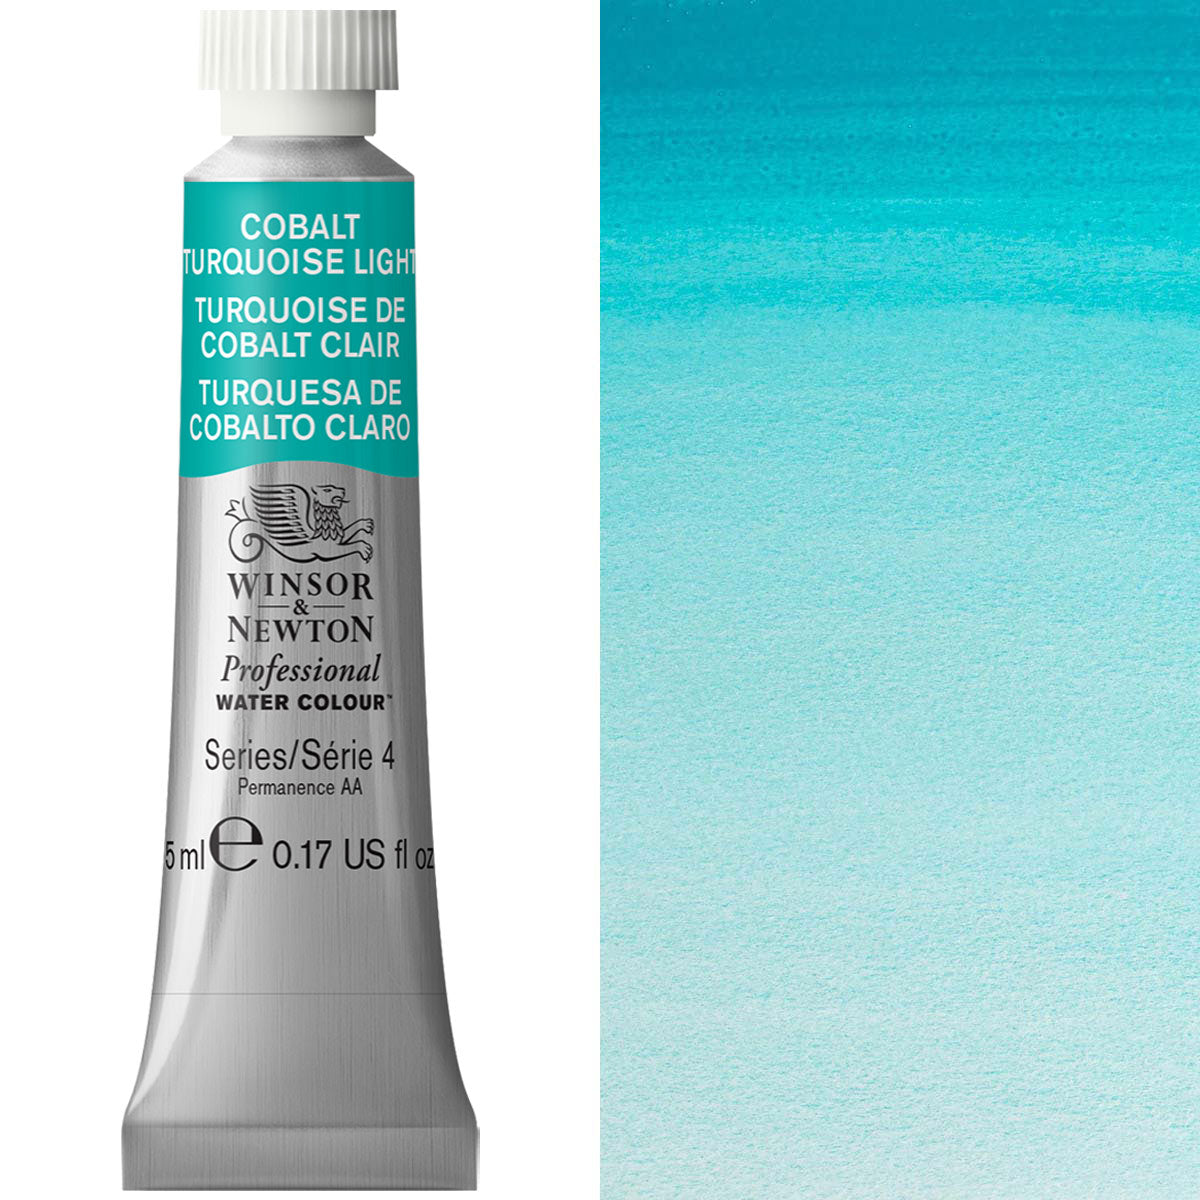 Winsor and Newton - Professional Artists' Watercolour - 5ml - Cobalt Turquoise Light